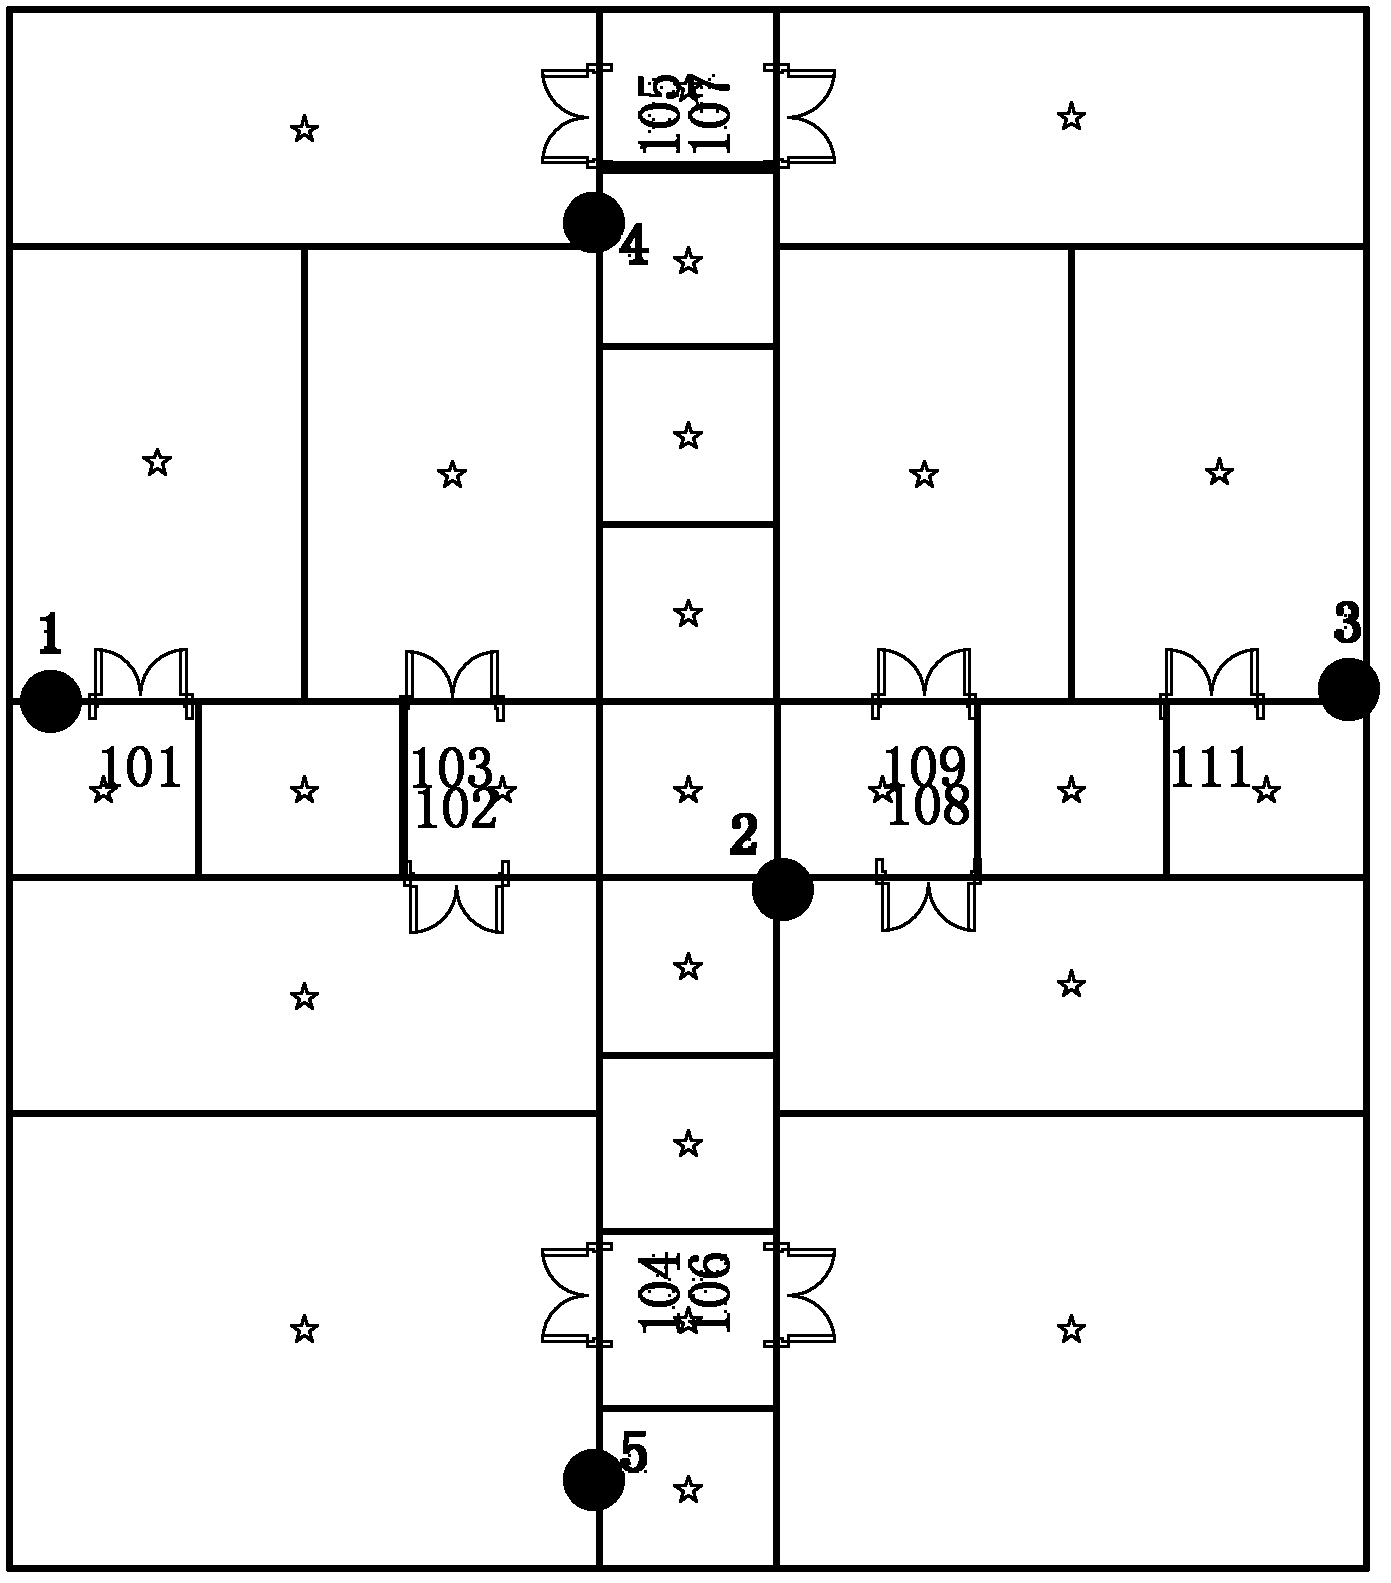 Indoor wireless positioning method and device